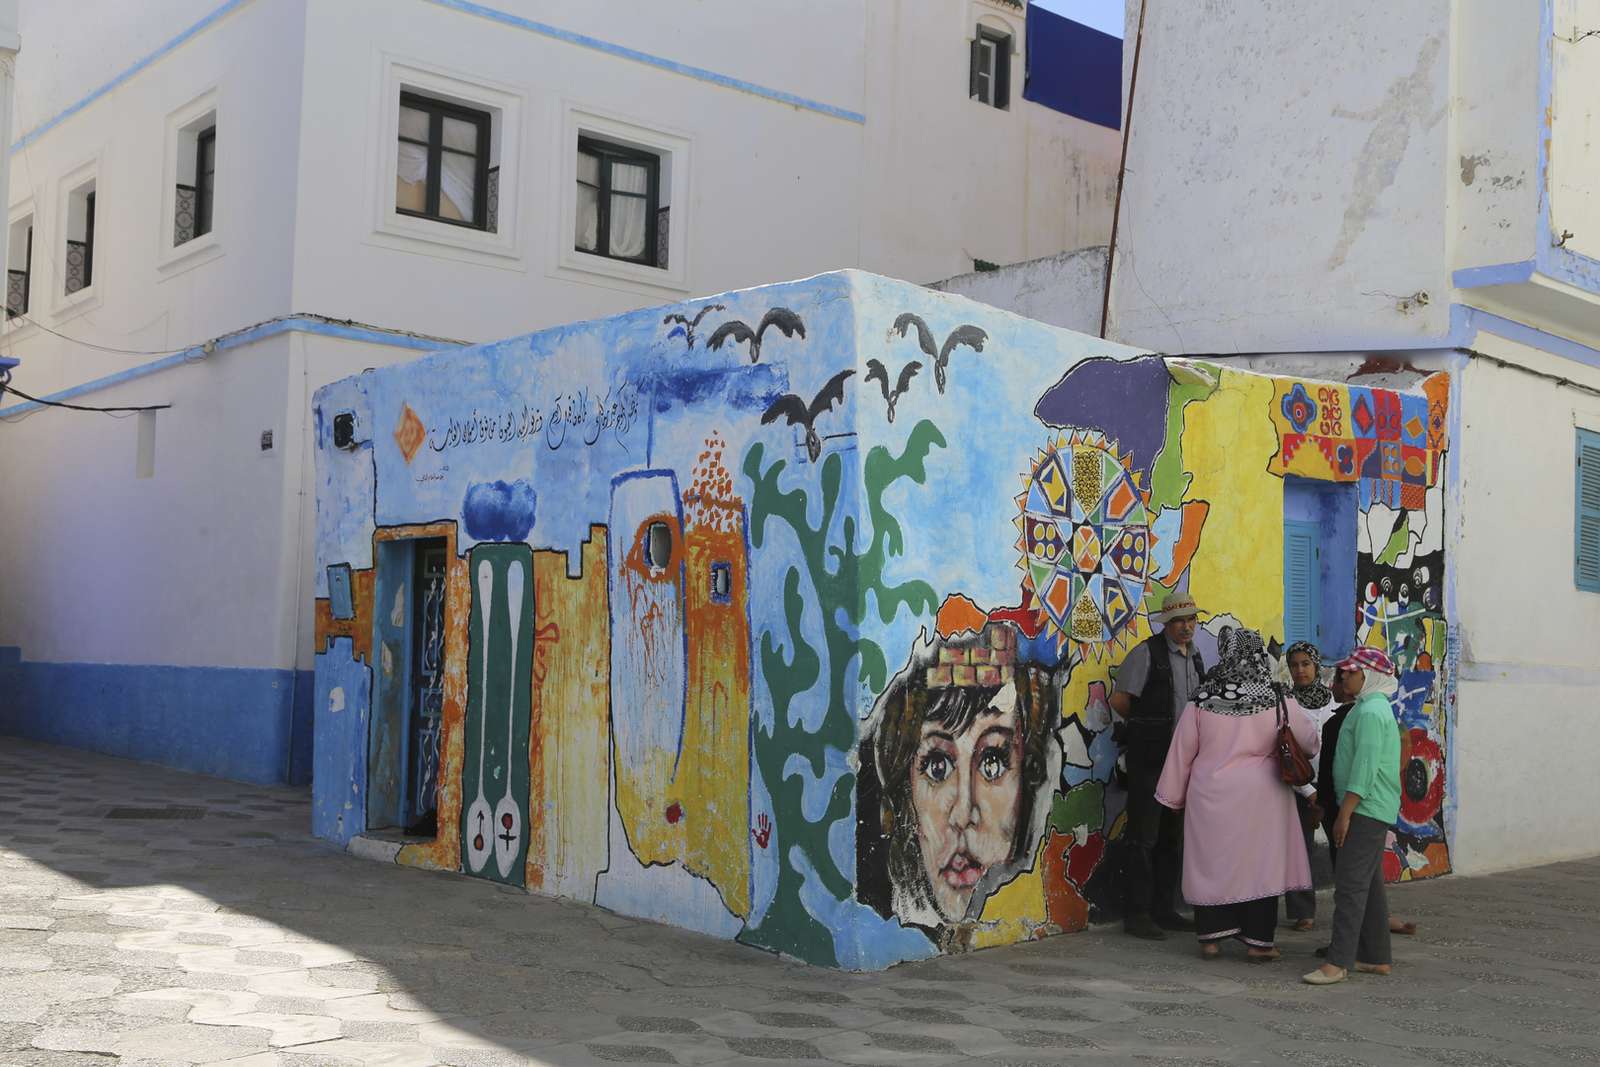 Asilah in Morocco in Africa online puzzle